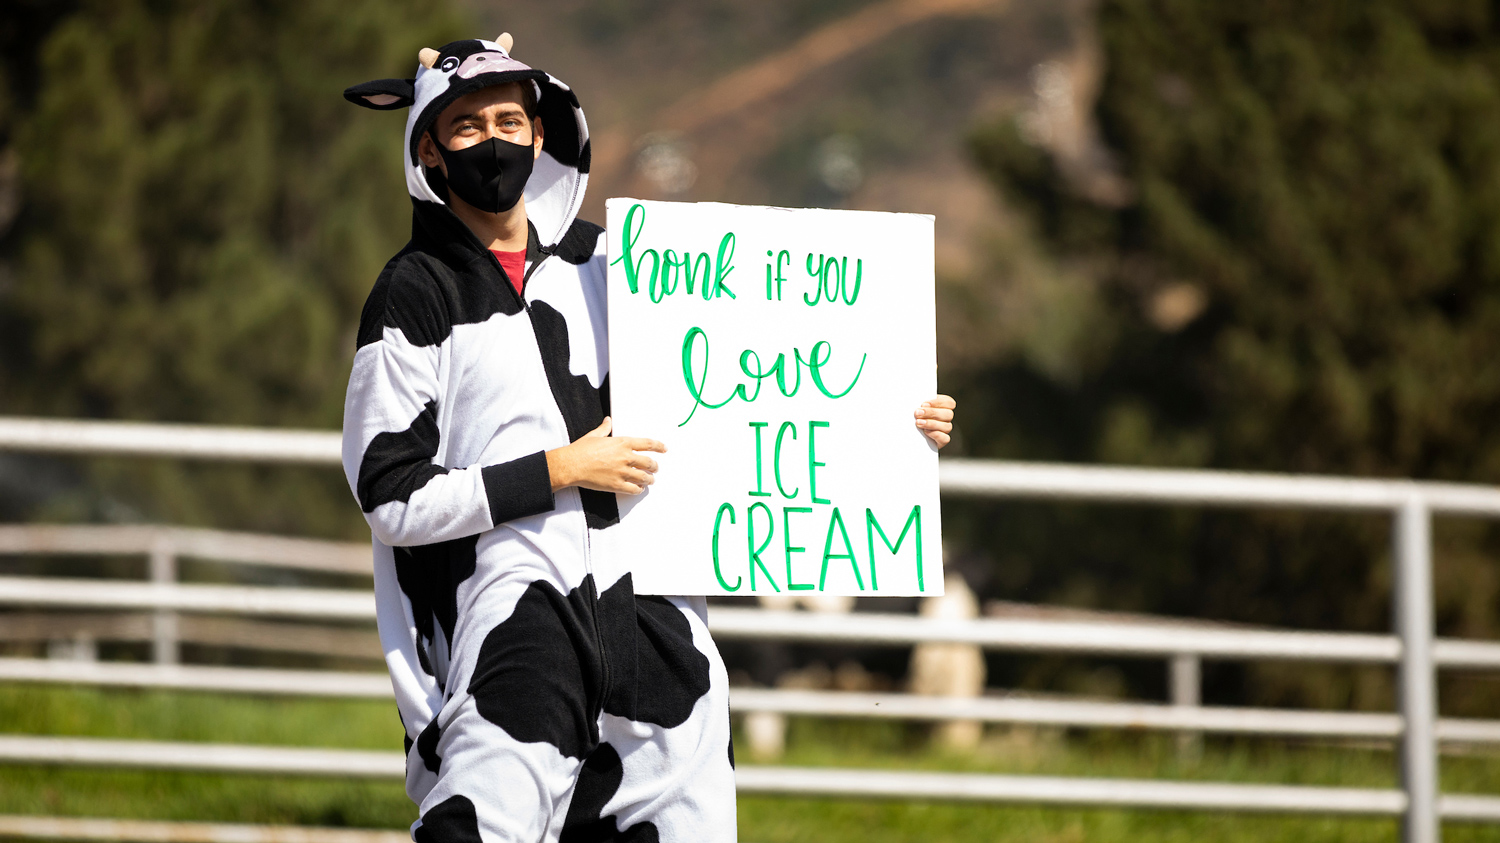 A person in a cow costume holds a sign that reads "honk if you love ice cream"